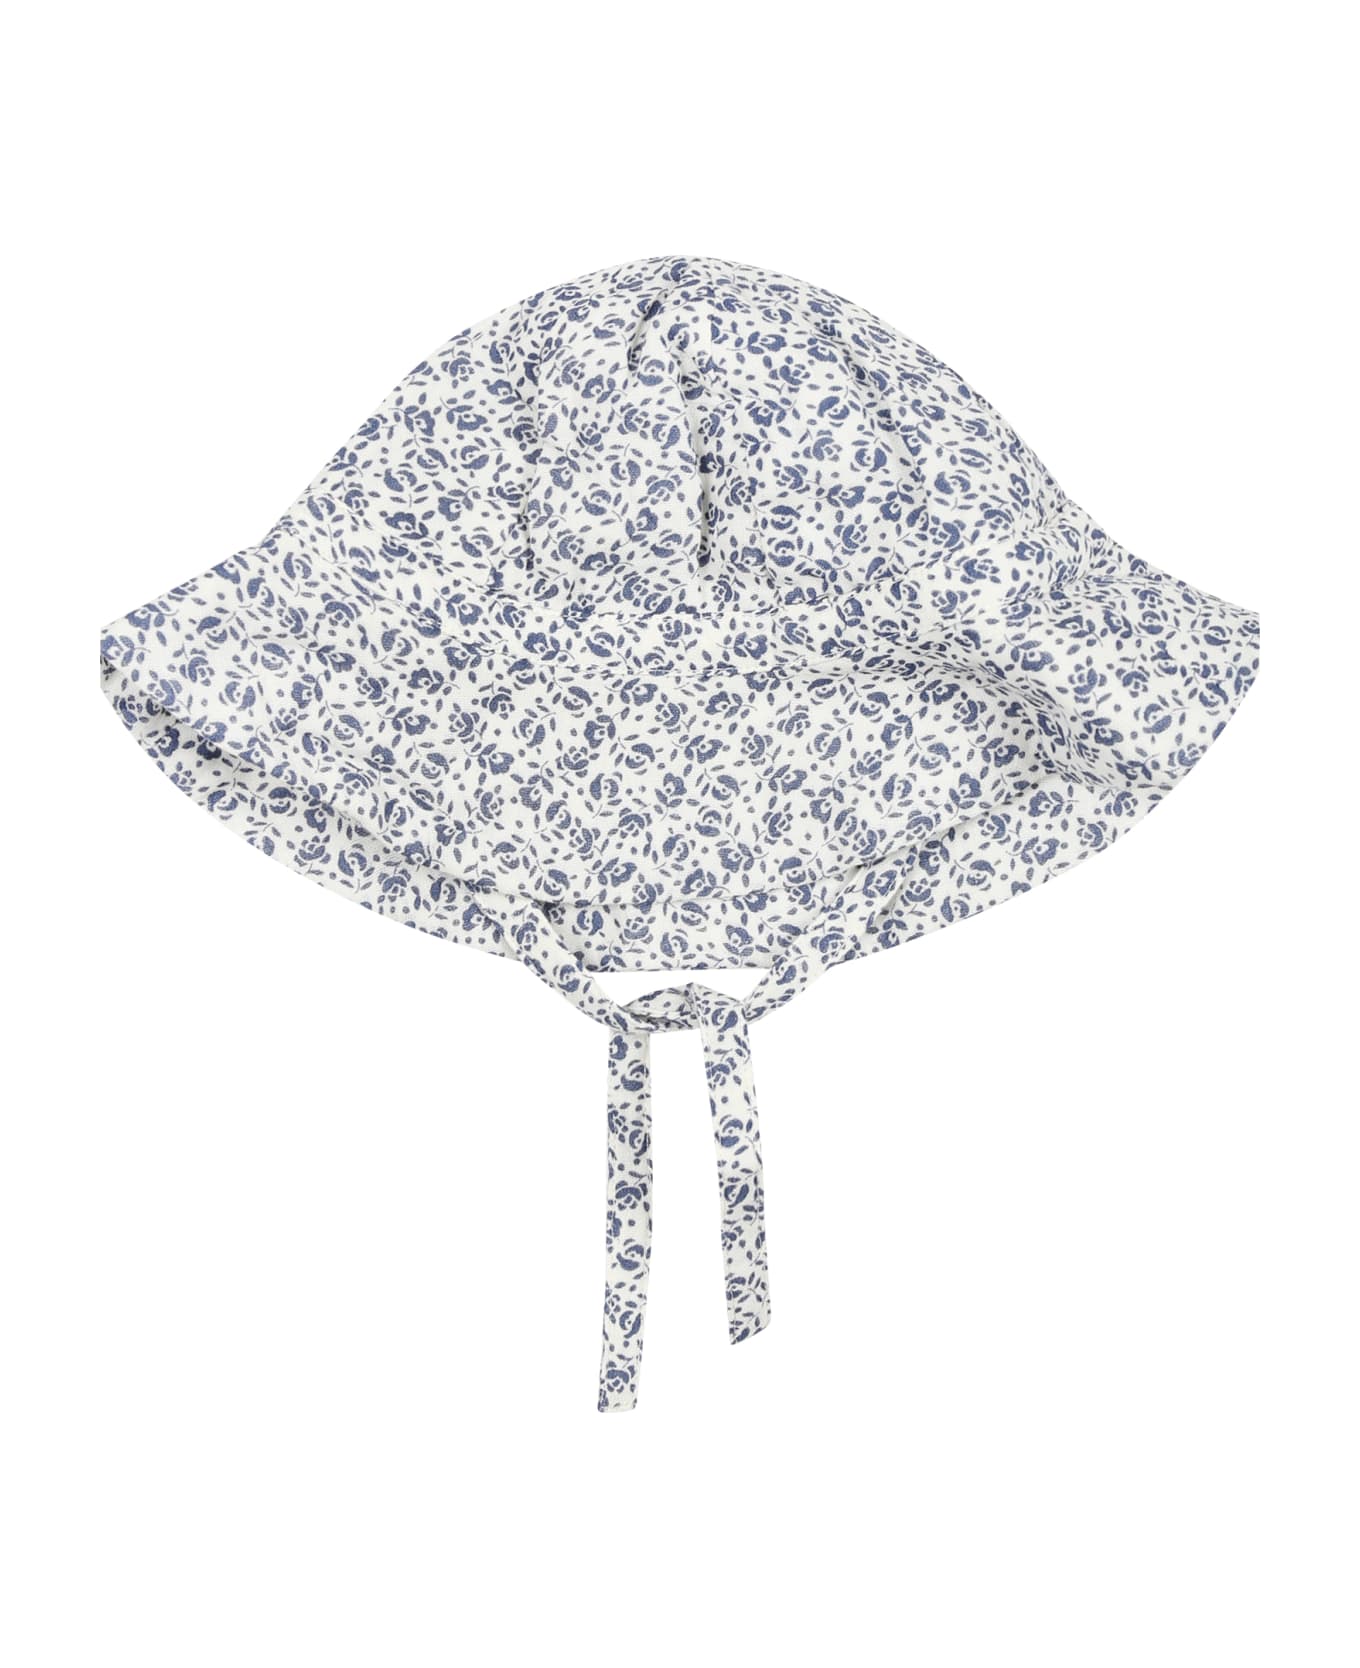 Petit Bateau White Cloche For Baby Girl With Flowers - White アクセサリー＆ギフト